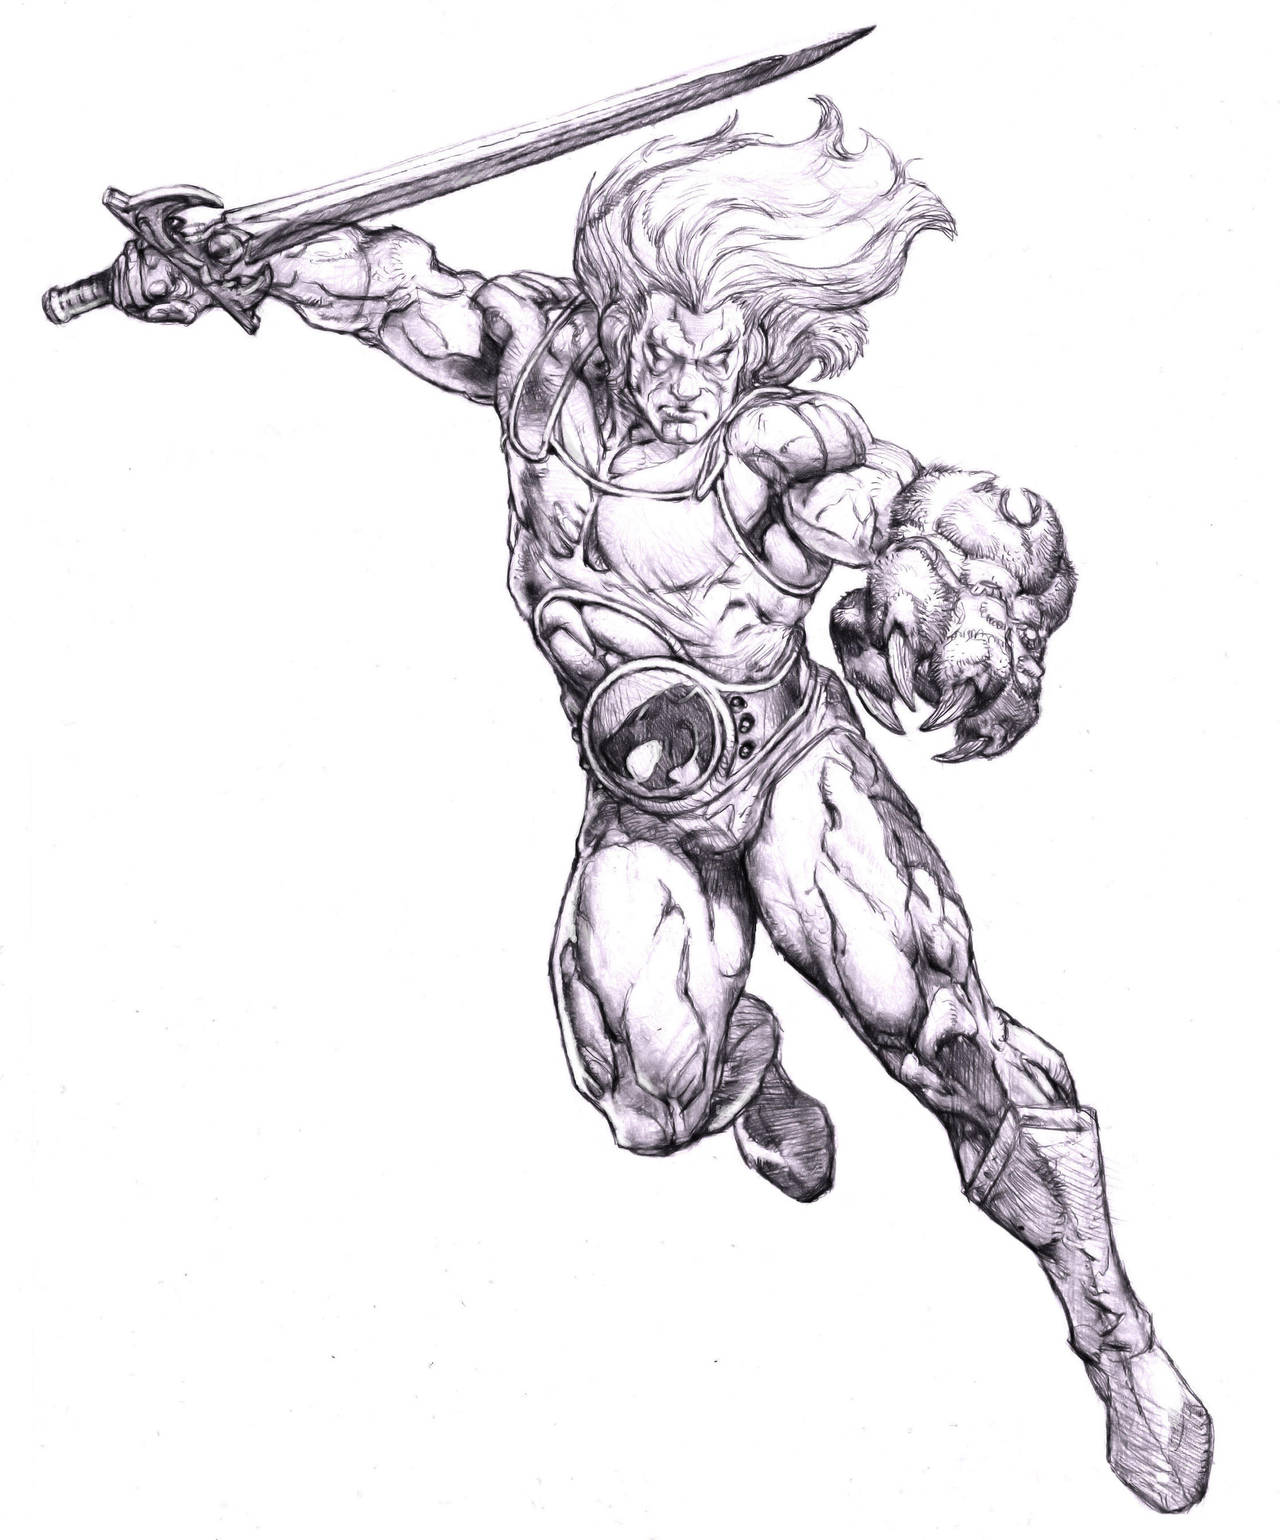 Printable Thundercats Coloring Pages Pdf - Thundercats Coloring Pages To Print